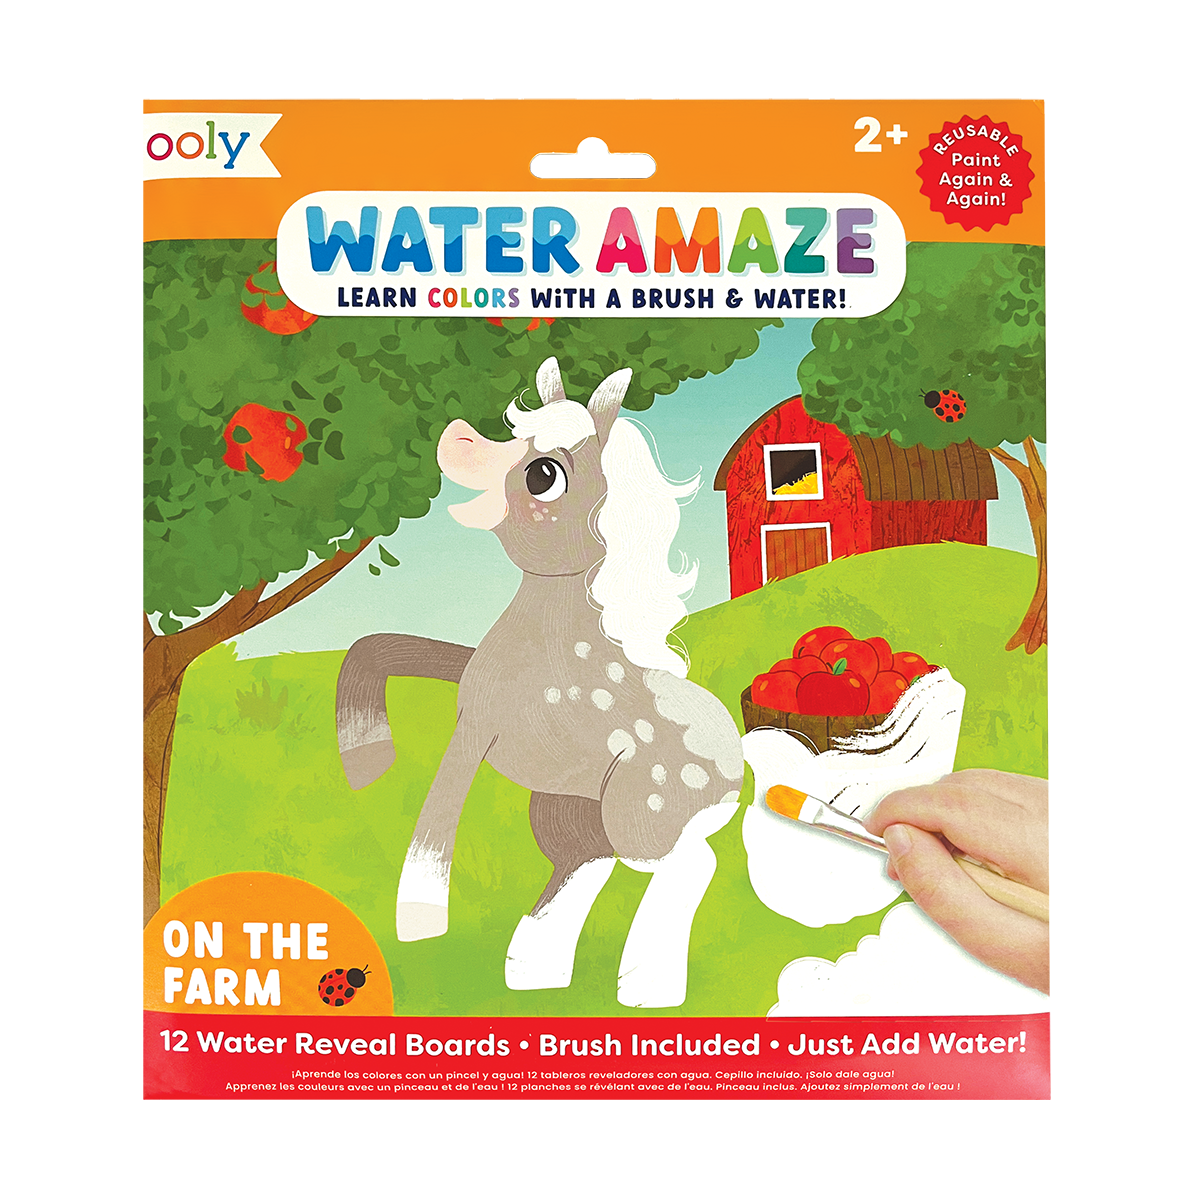 OOLY Water Amaze Water Reveal Boards - On The Farm cover view